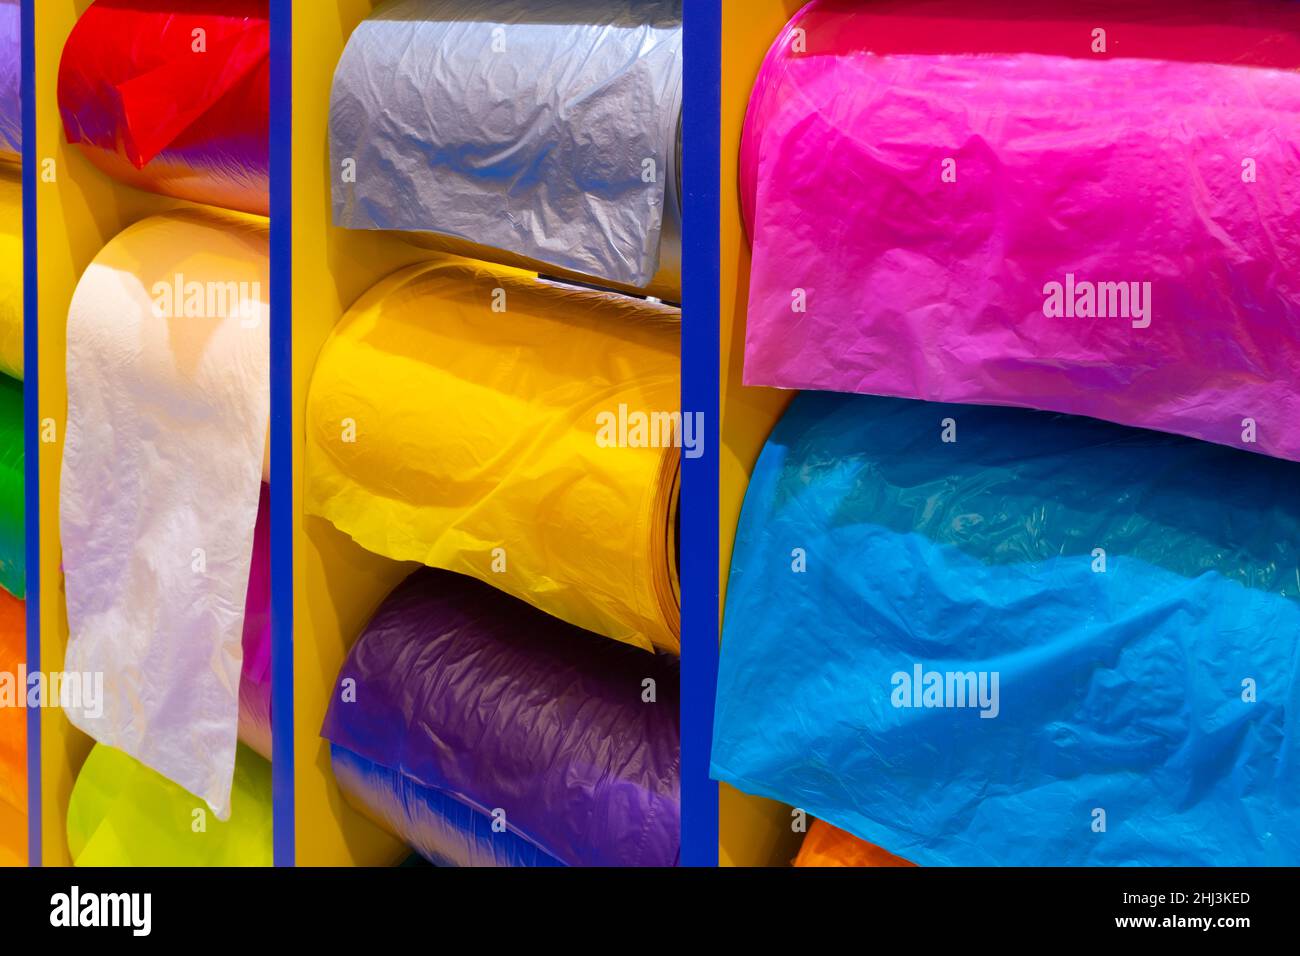 https://c8.alamy.com/comp/2HJ3KED/multicolor-rolls-of-polyethylene-film-in-stock-modern-warehouse-and-storage-systems-2HJ3KED.jpg